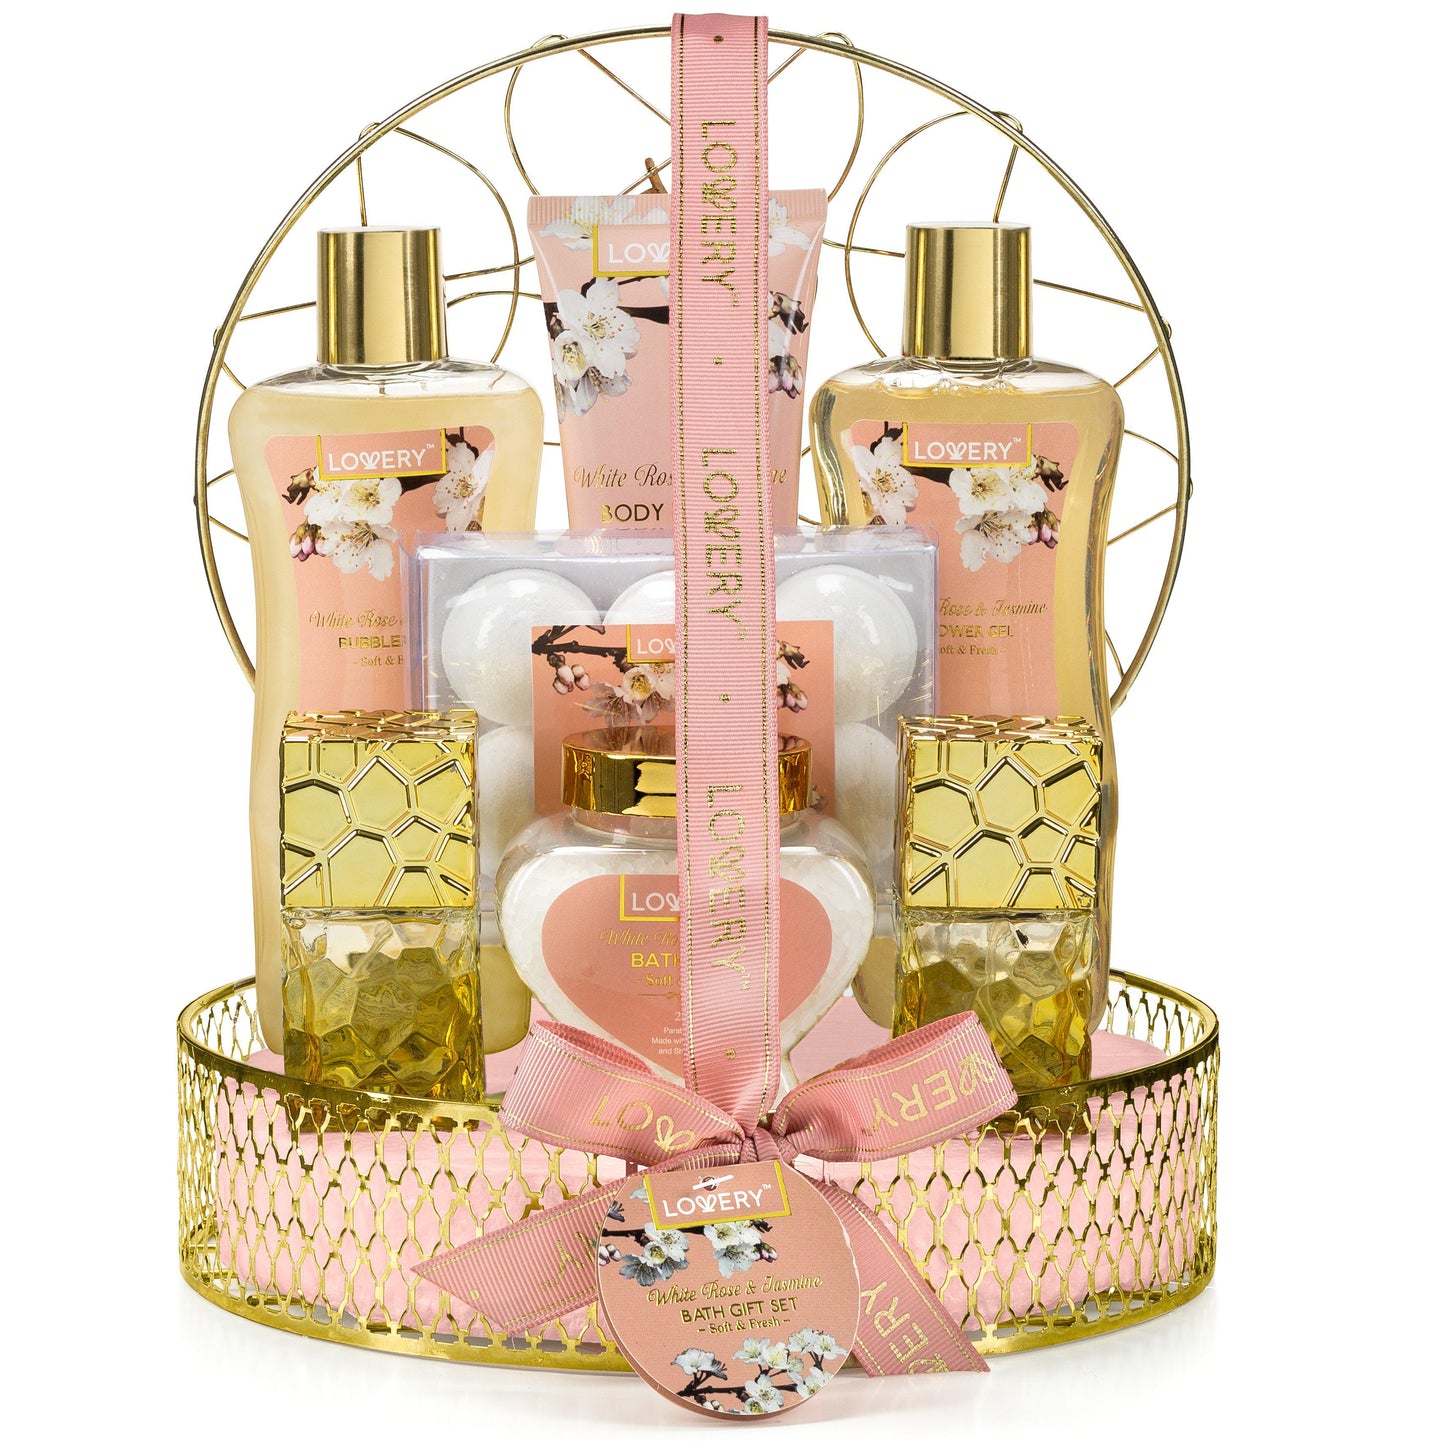 White Rose and Jasmine Spa Bath and Body Set In a Gold Perfume Holder - Lovery